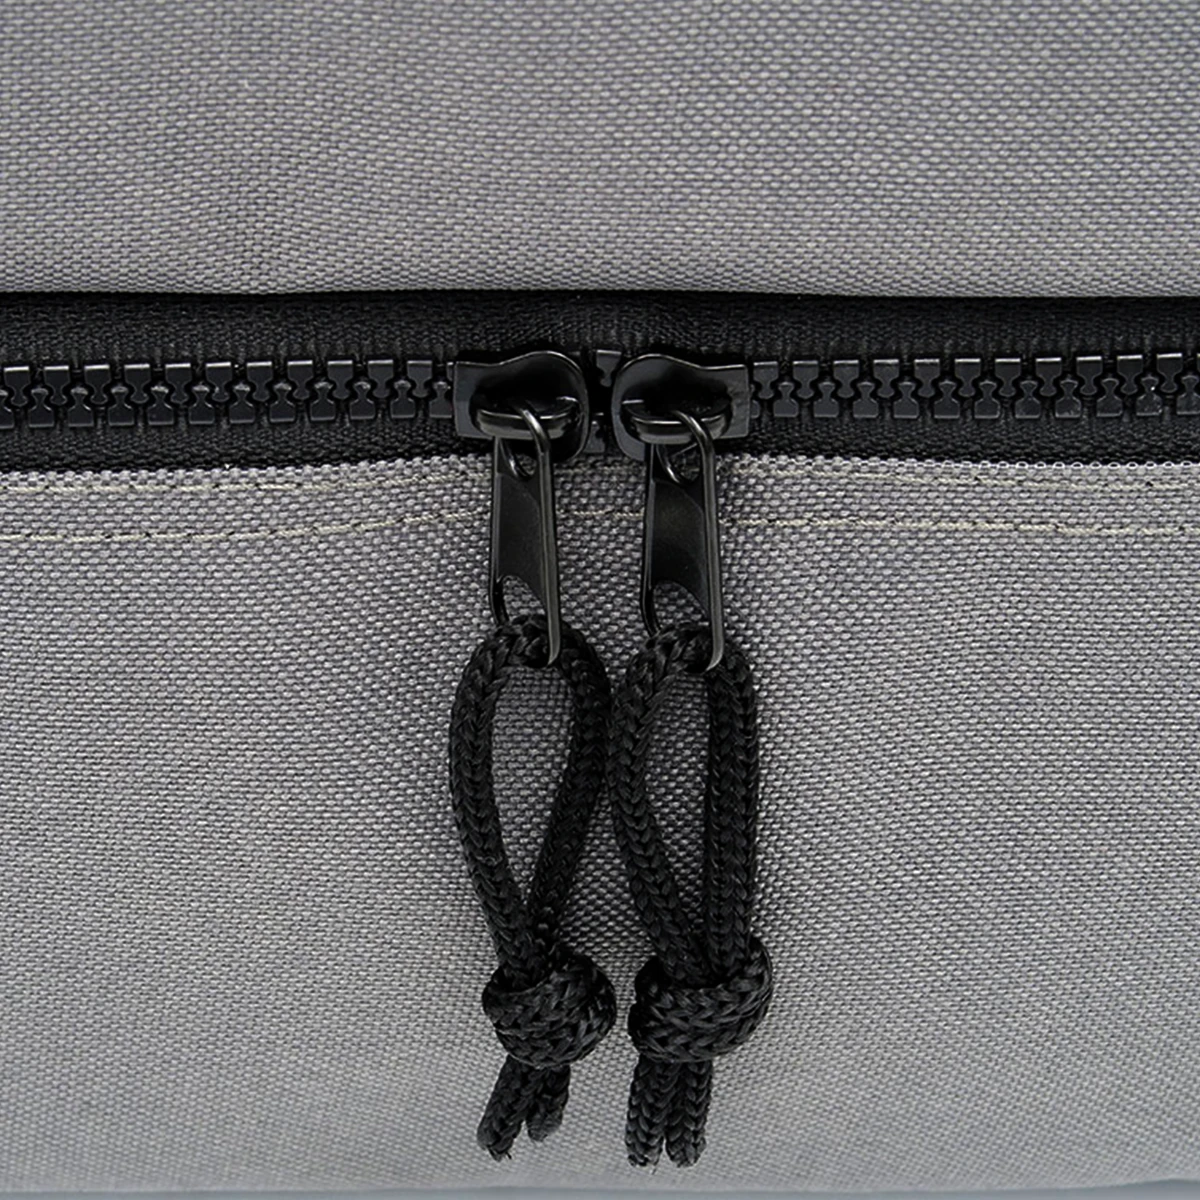 Call of Duty Rolltop Backpack "Blind" Grey Image 5